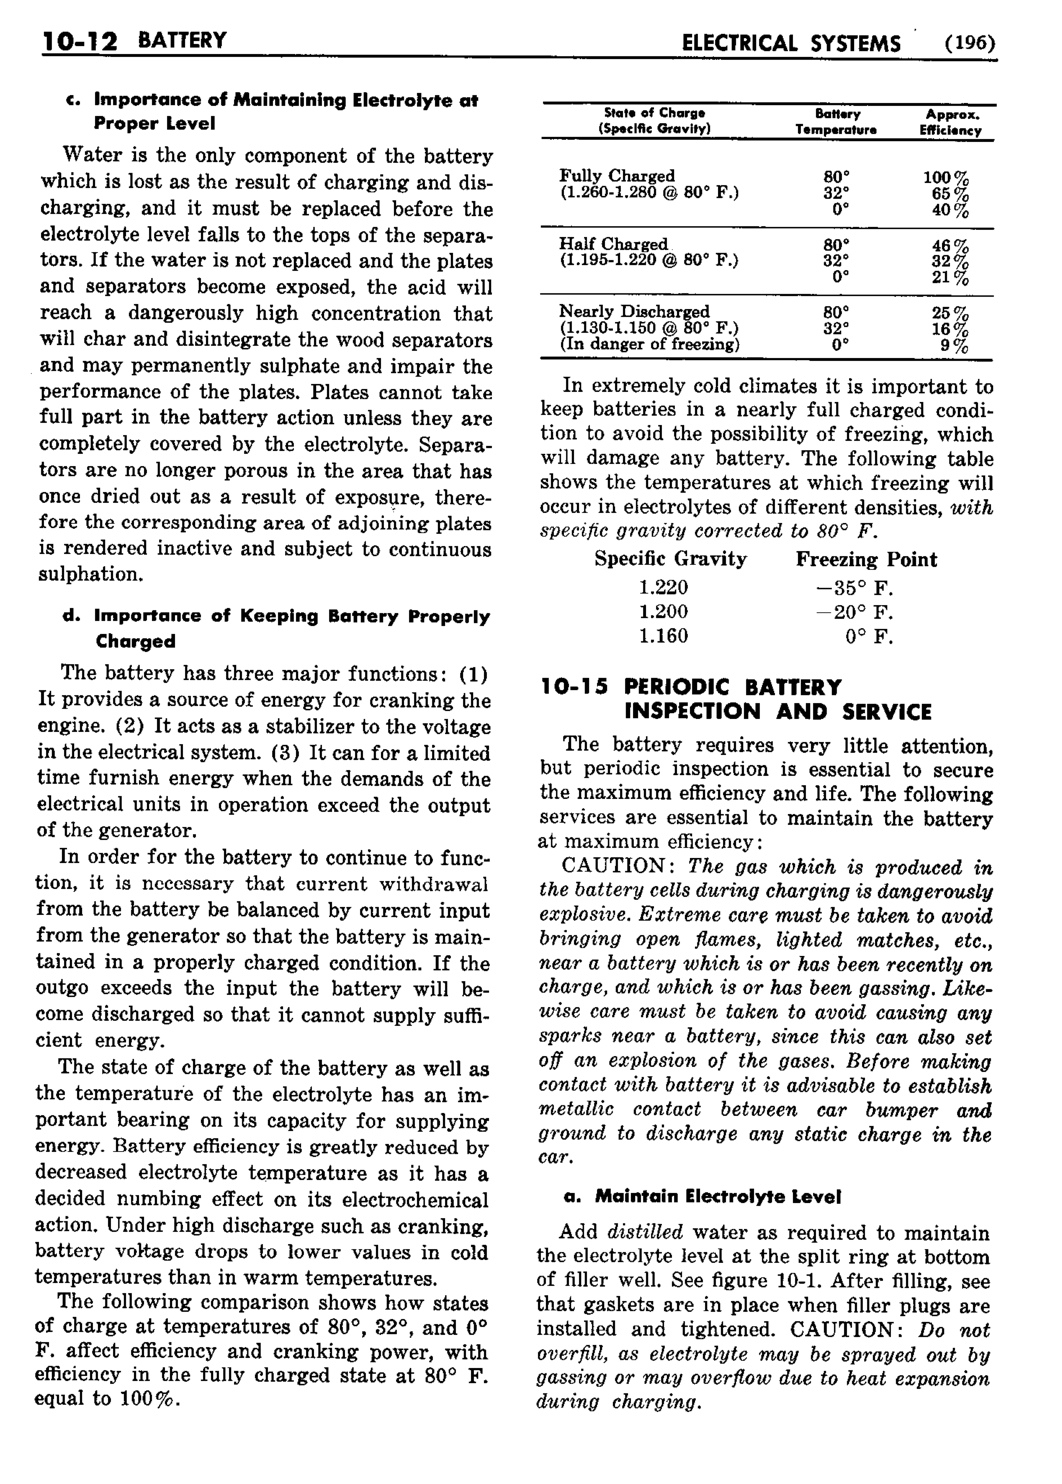 n_11 1953 Buick Shop Manual - Electrical Systems-012-012.jpg